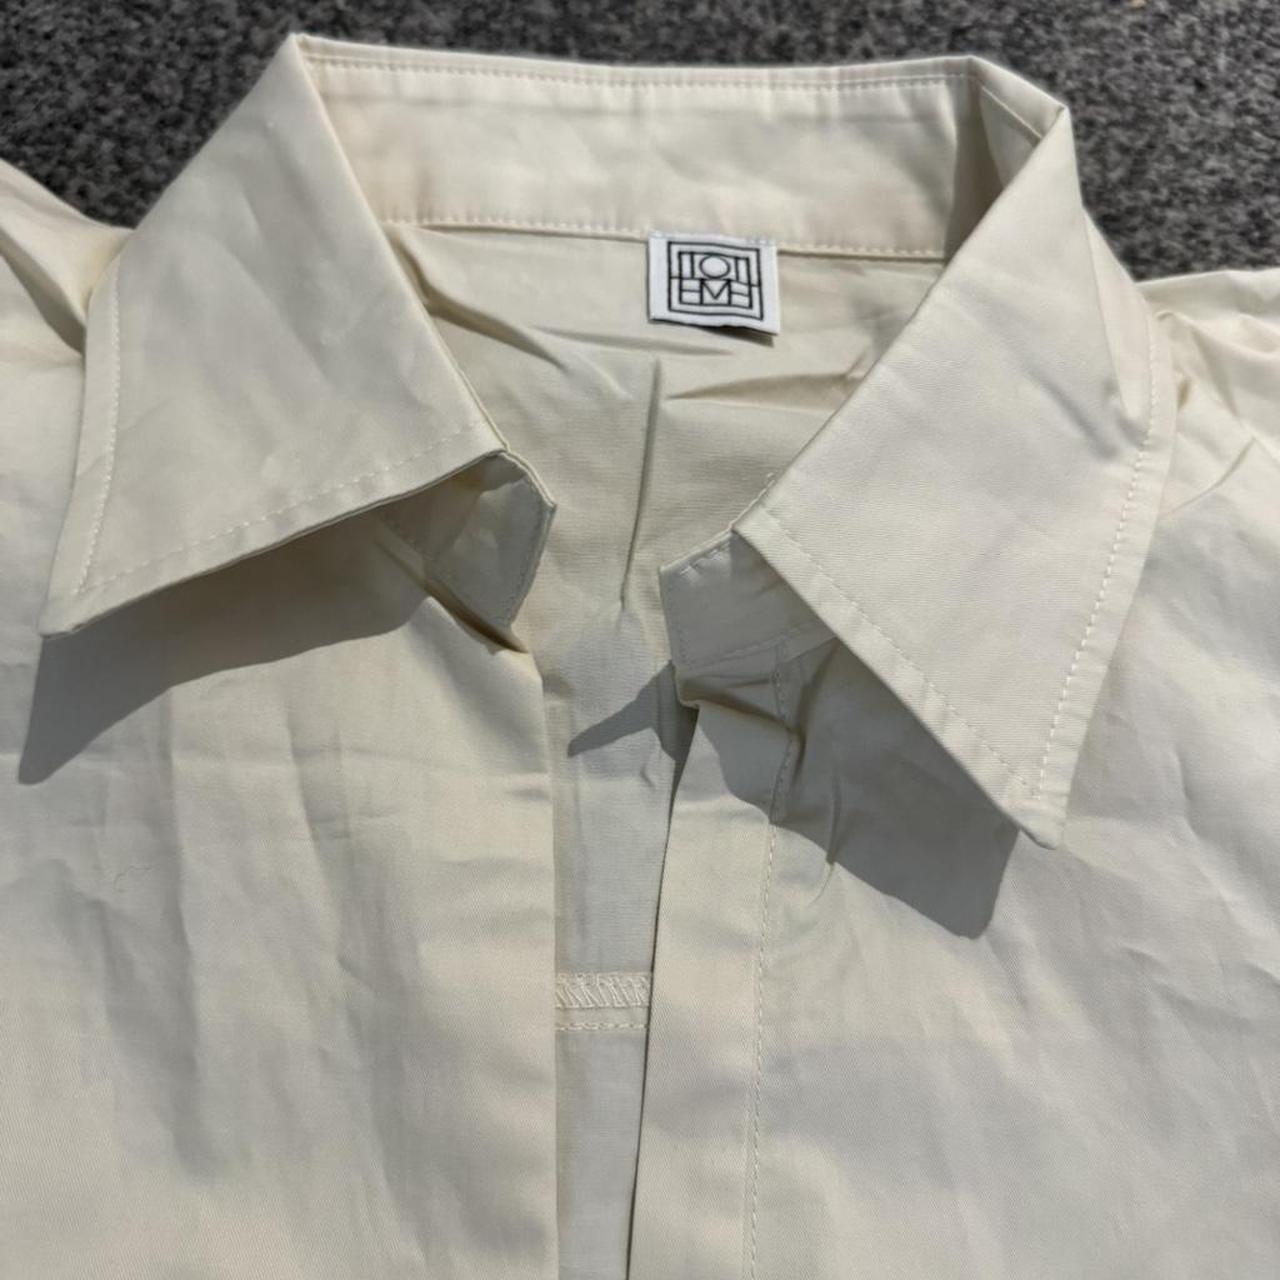 toteme cream shirt Brand new without tags Size small - Depop